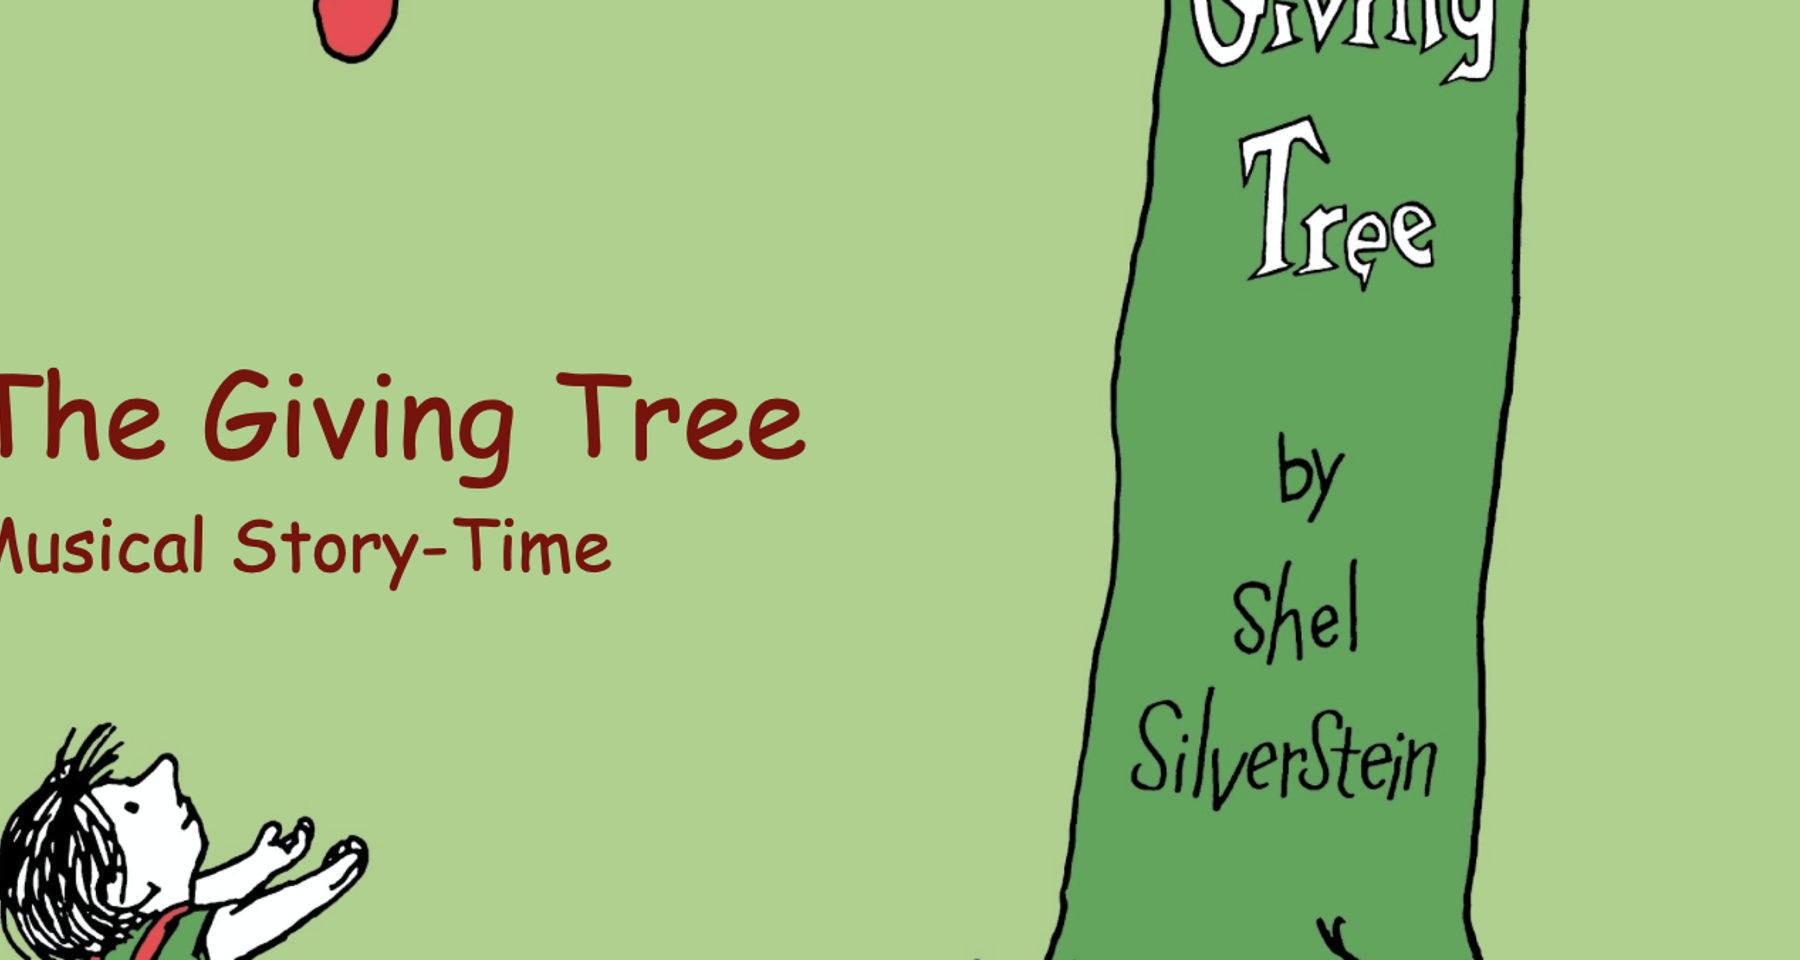 The Giving Tree: Family concert set to Beloved Tchaikovsky Ballet Music